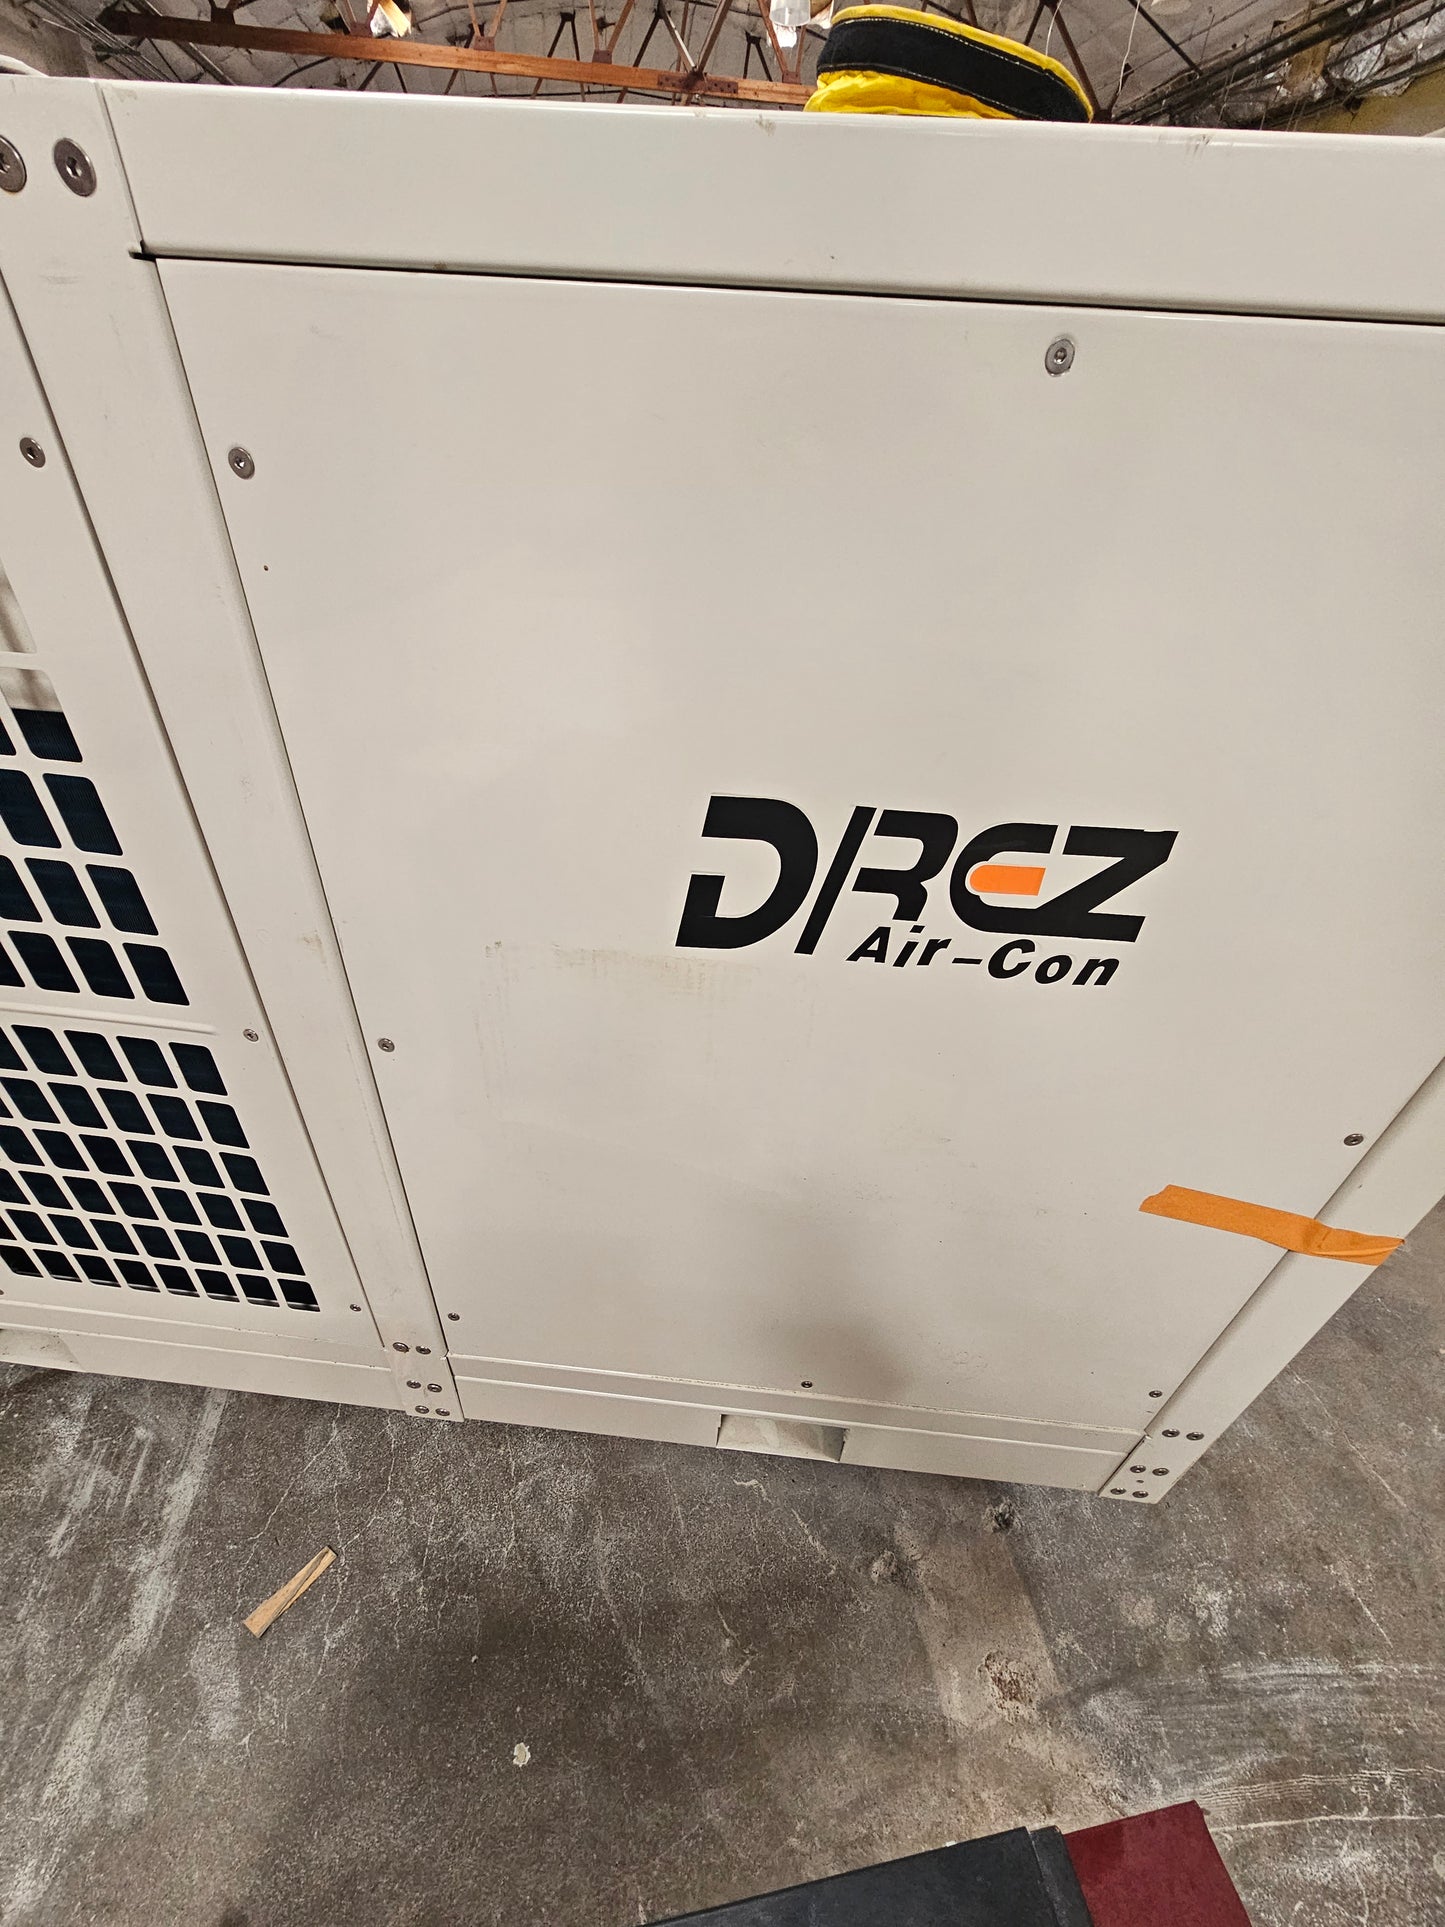 Drez DCT 280 Canopy/Tent Air condirioning system